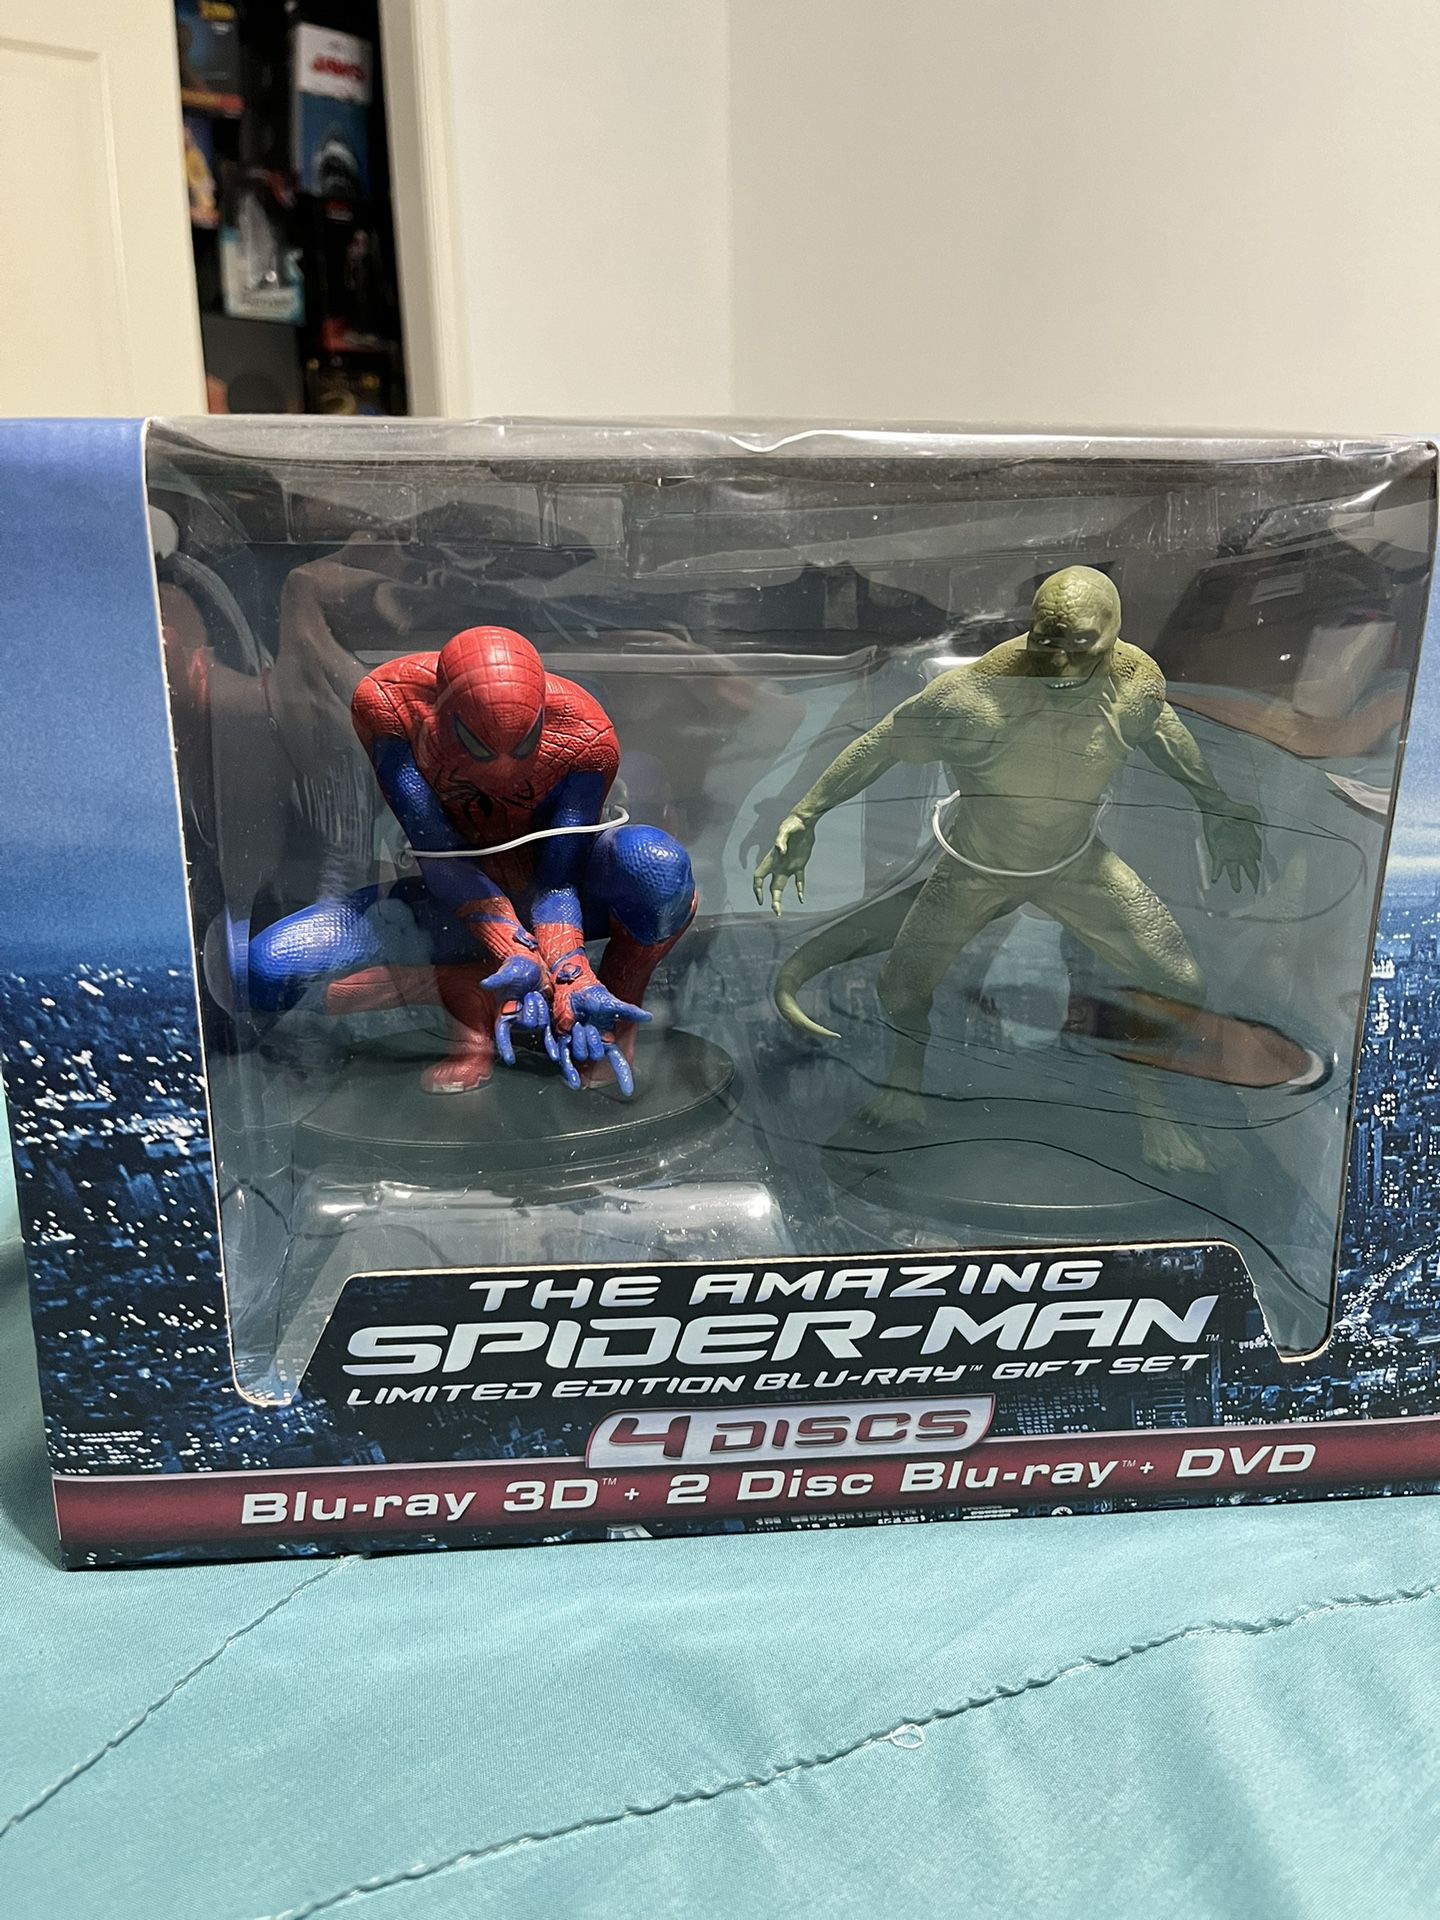 The Amazing Spider-man Limited Edition Gift Set (statues only)